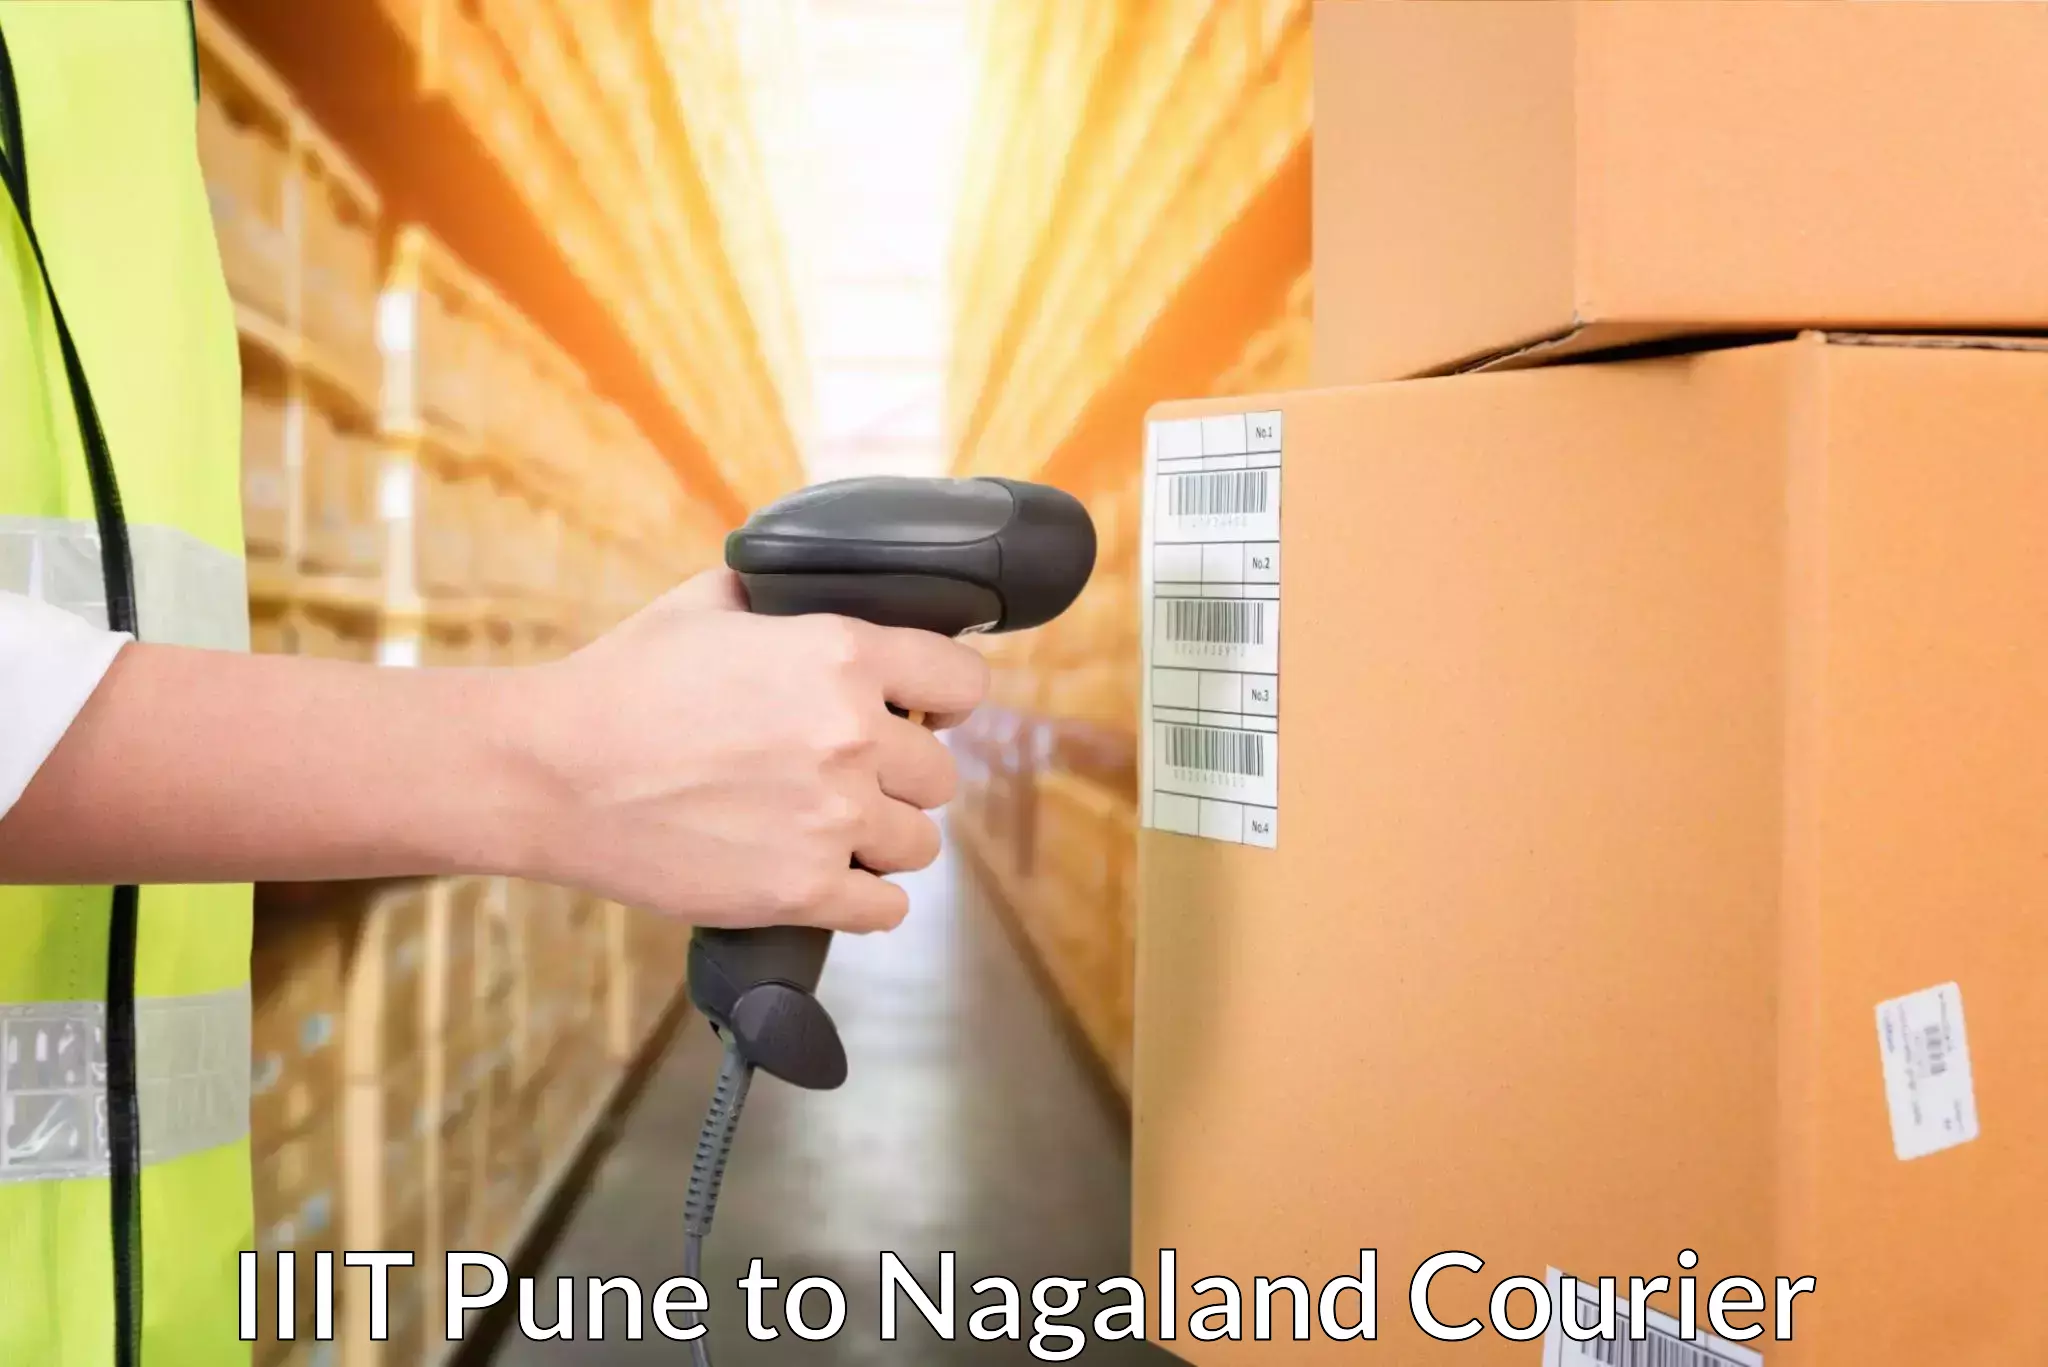 Courier service booking IIIT Pune to Nagaland